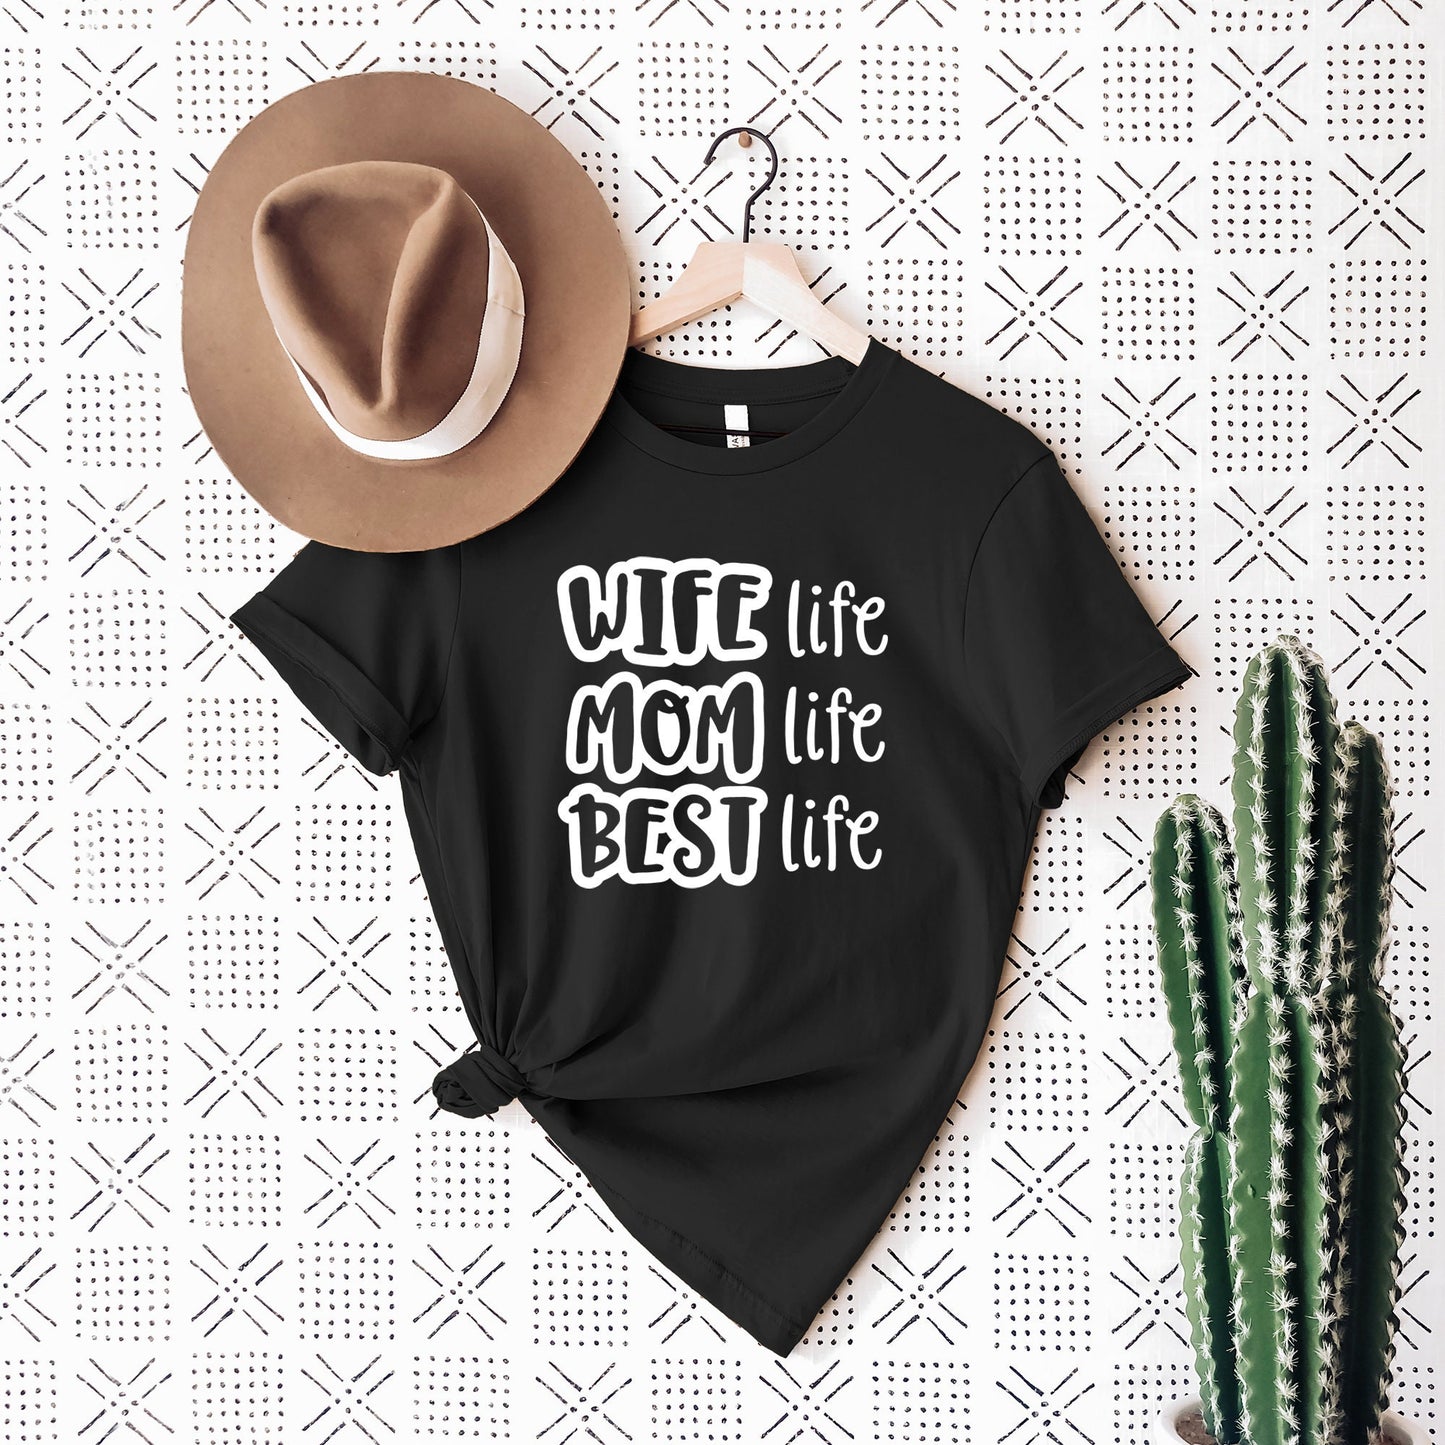 Mother's Day Gift, Gifts for Her, Mom Shirts, Mom-life Shirt, Shirts for Moms, Trendy Mom T-Shirts, Cool Mom Shirts, Shirts for Moms